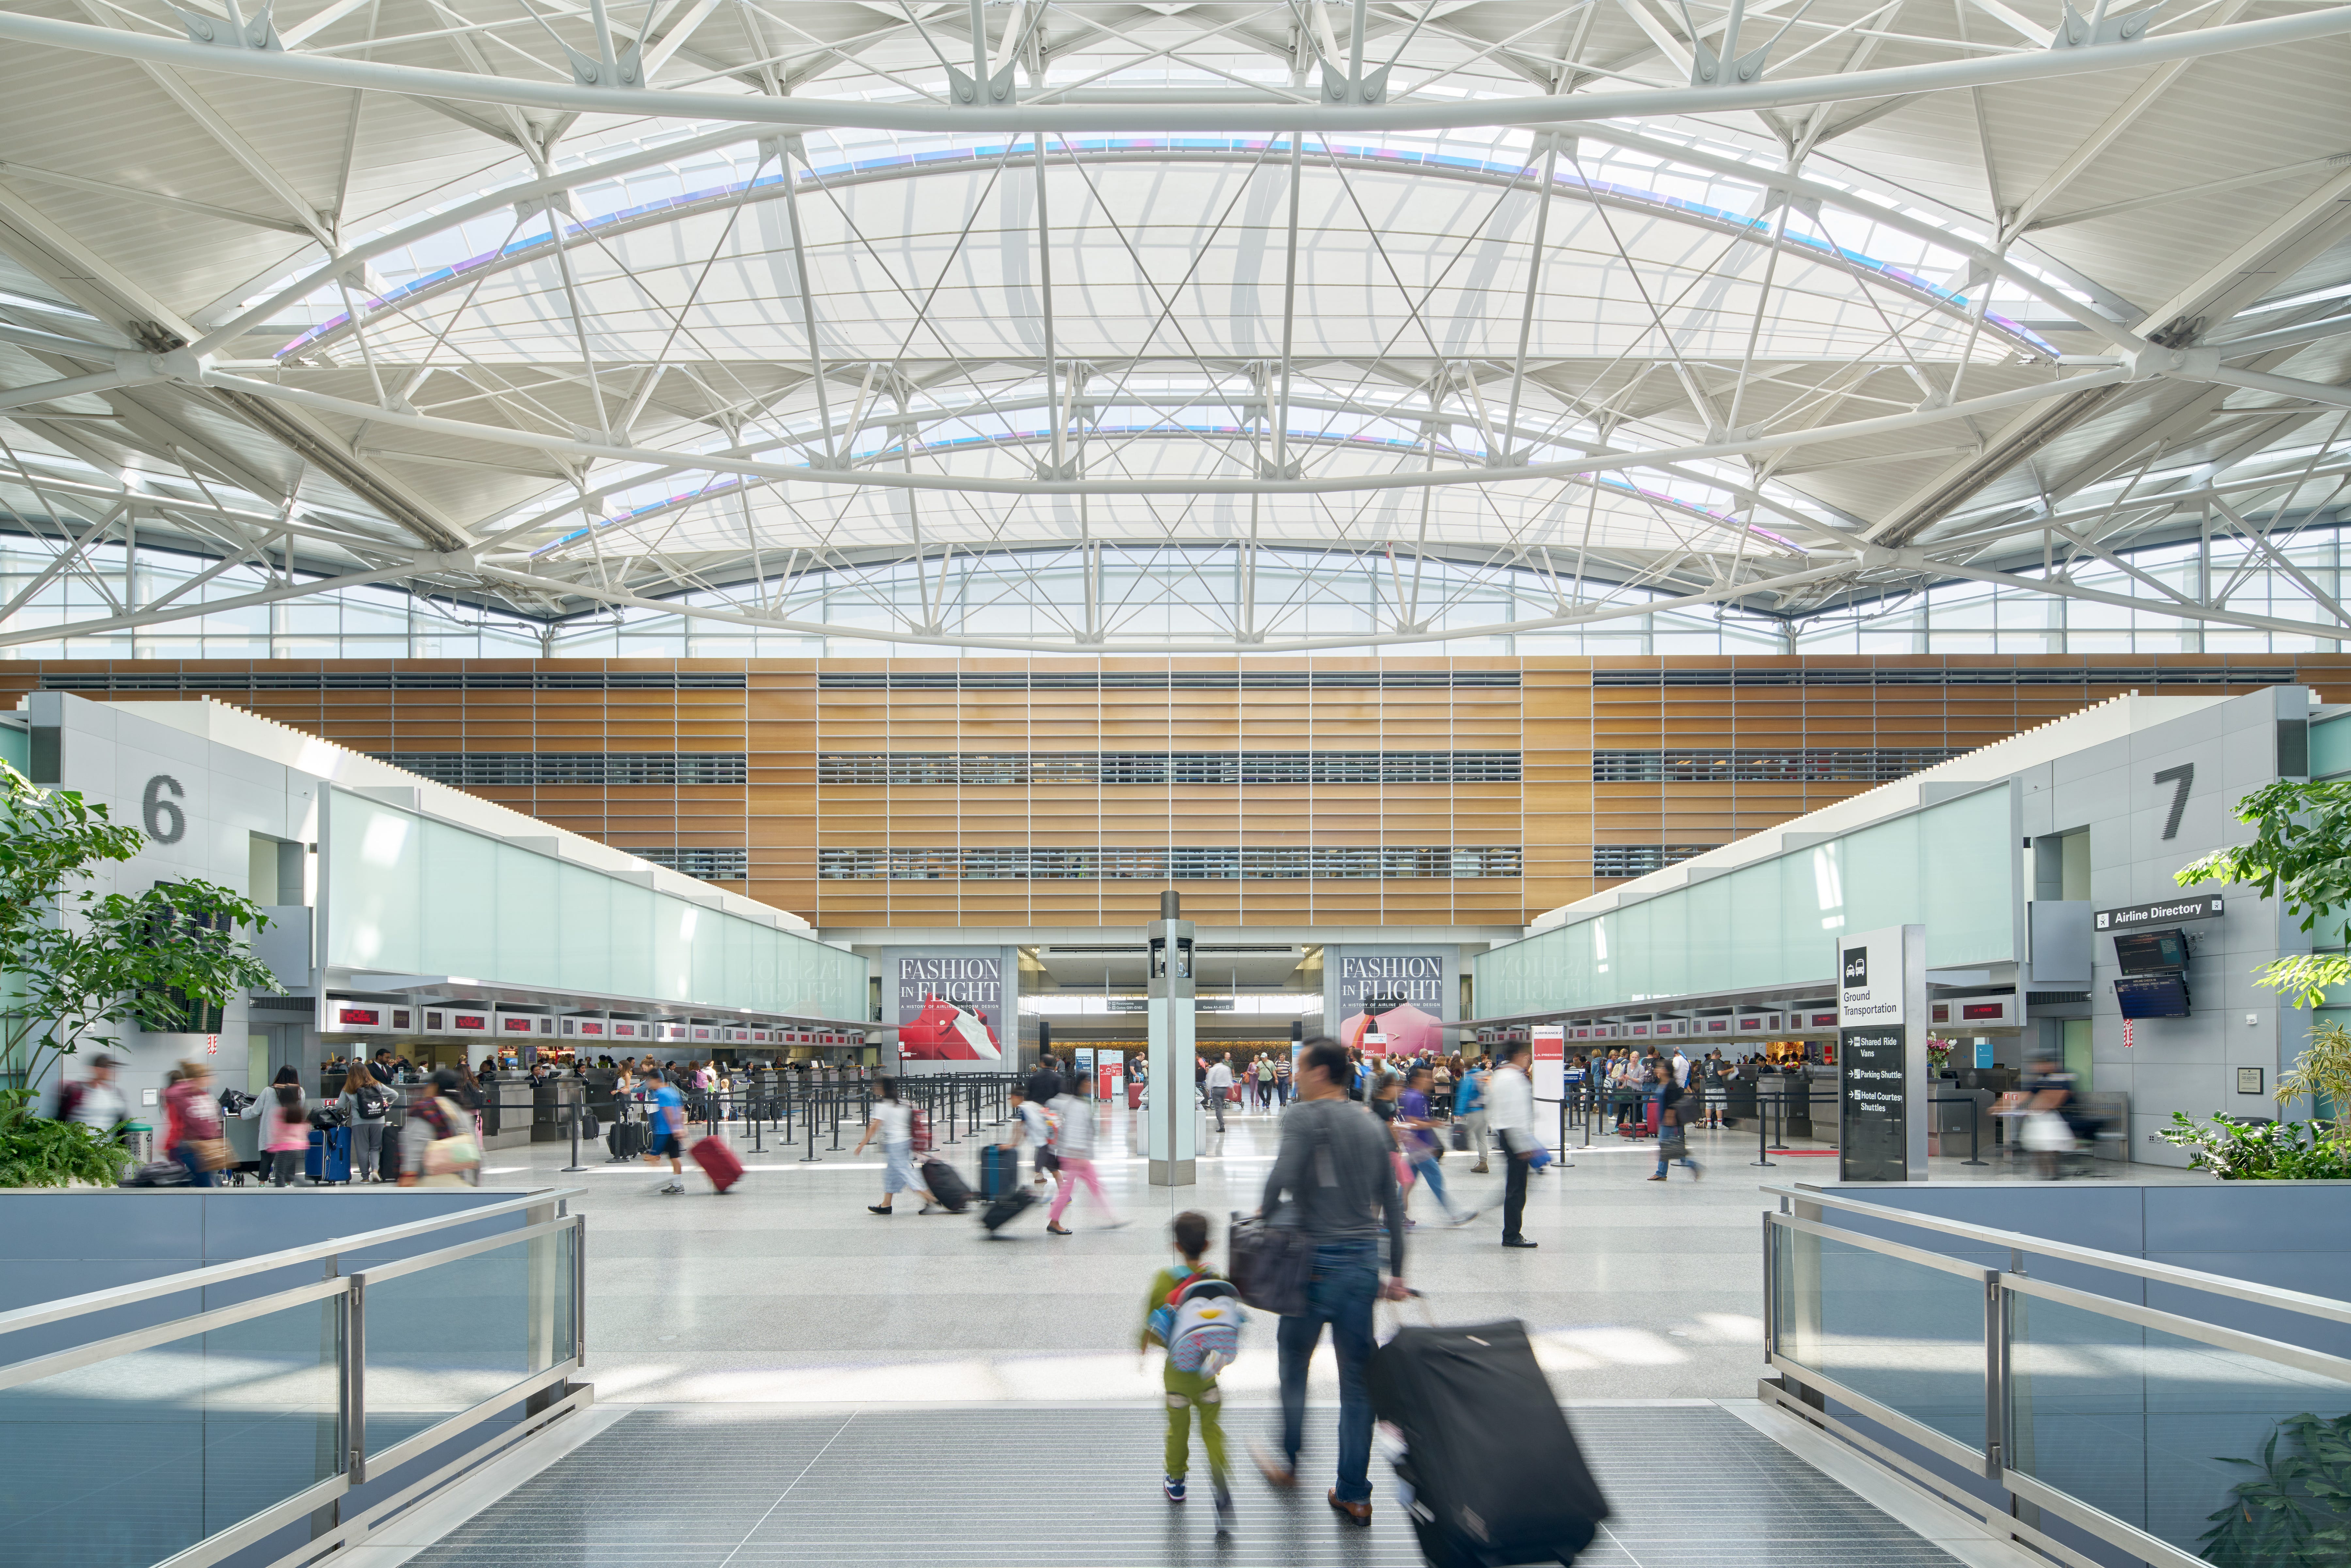 Can Architecture Calm The Turbulence Of Air Travel